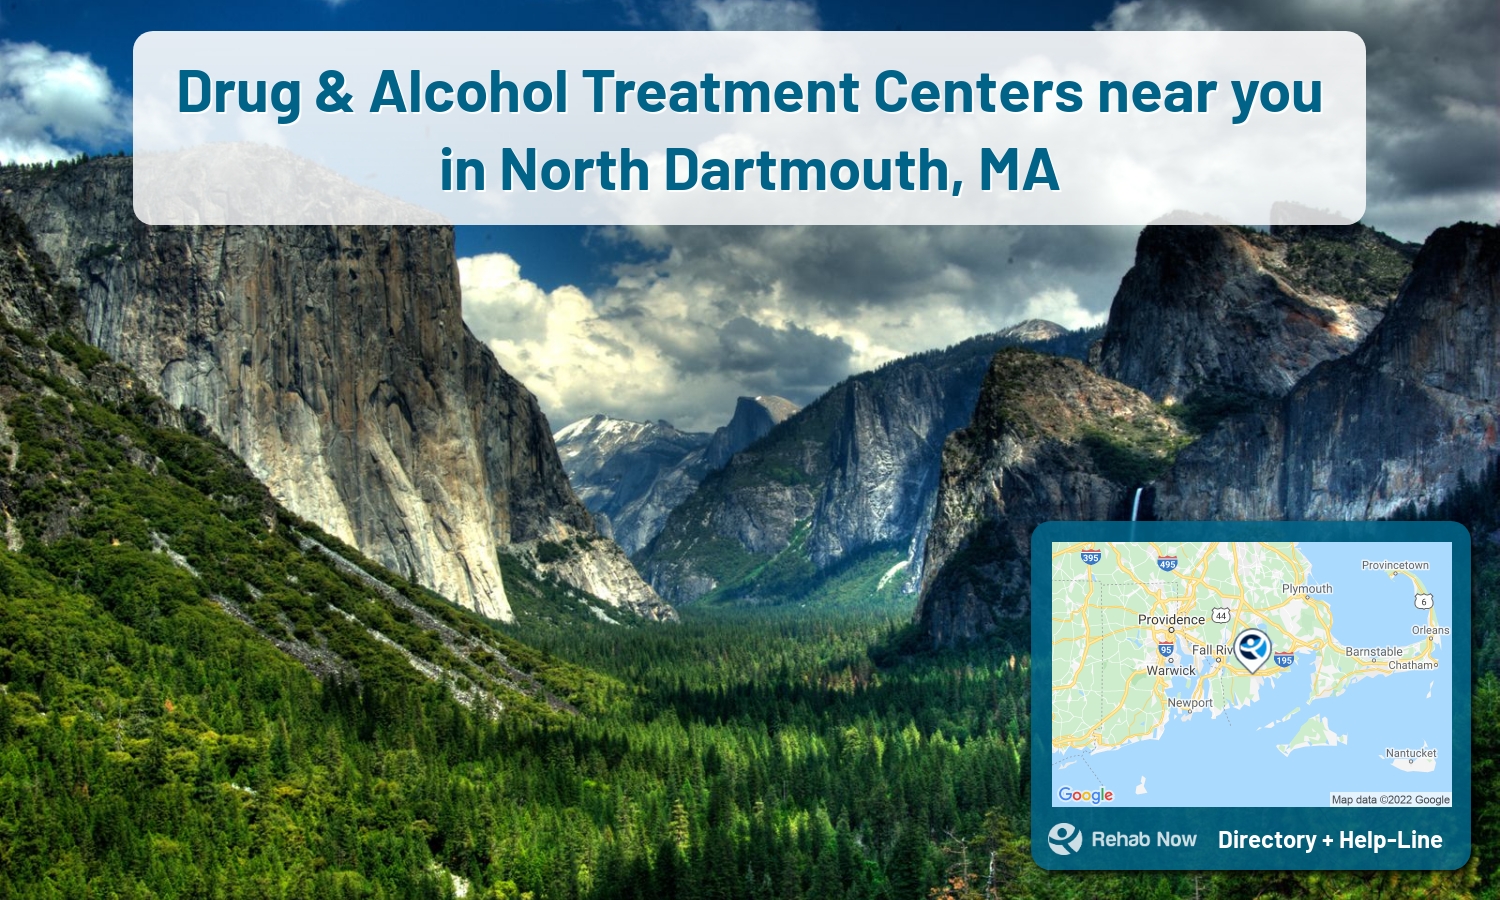 Let our expert counselors help find the best addiction treatment in North Dartmouth, Massachusetts now with a free call to our hotline.